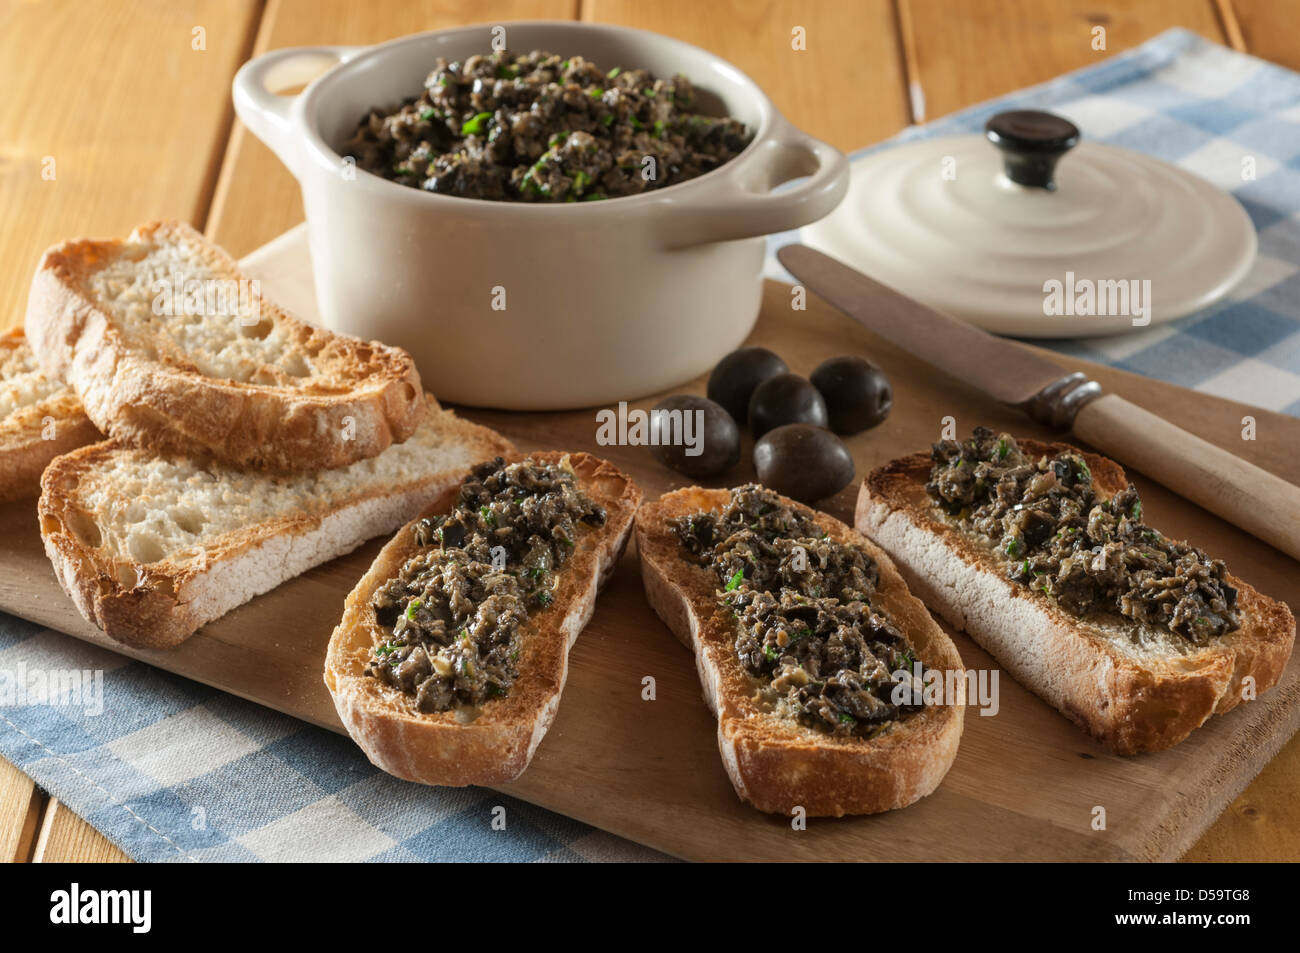 Black olive tapenade on toasted french bread Stock Photo